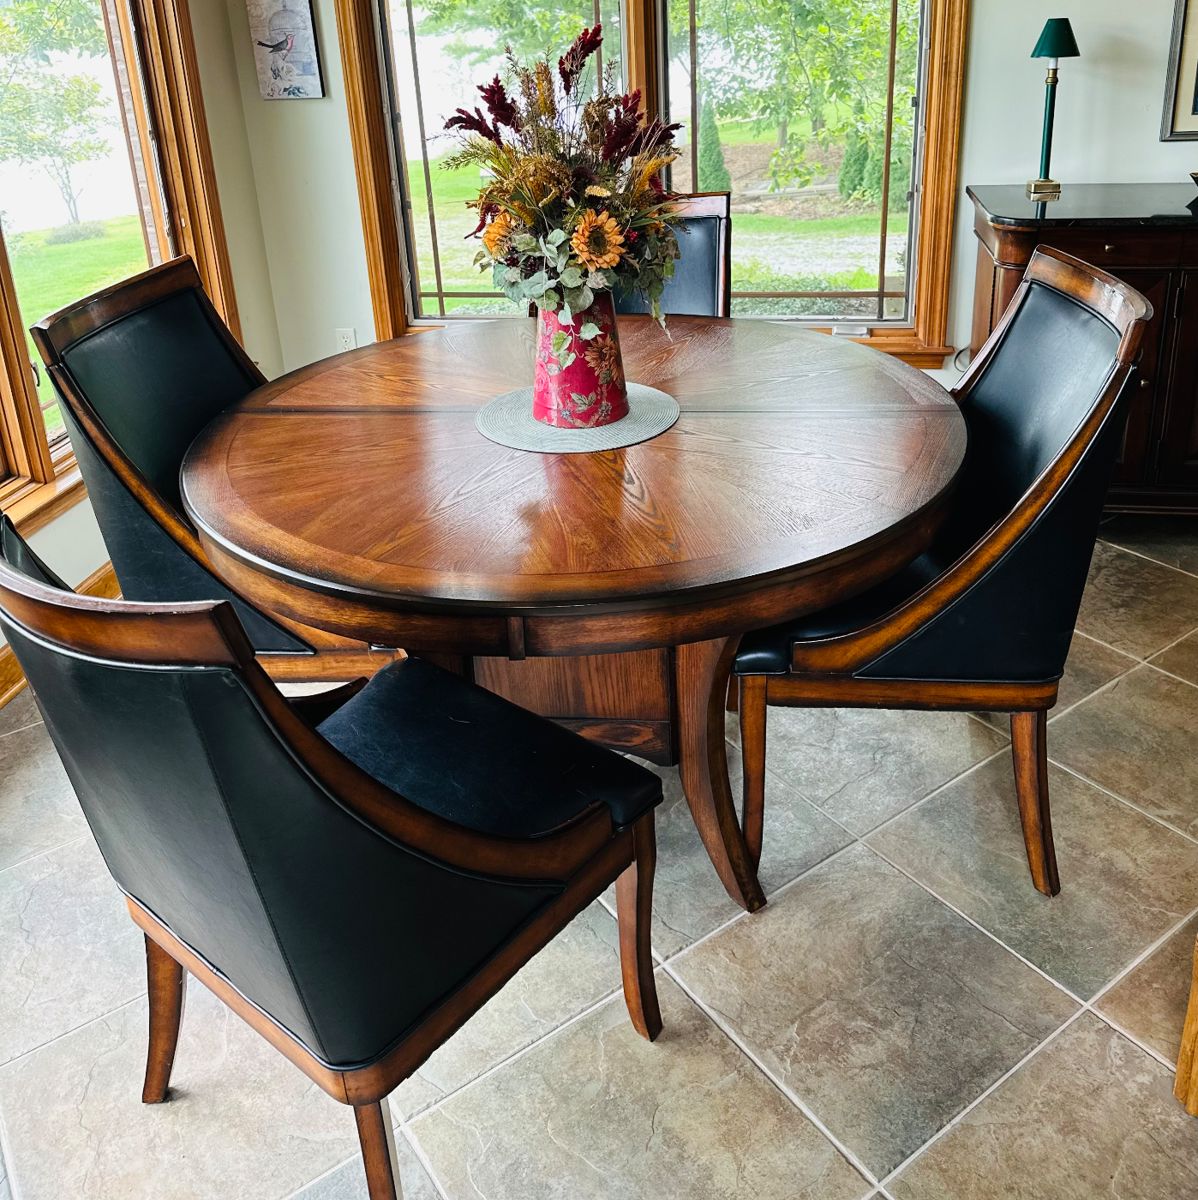 New Classic Furniture by Aspen, Round Table, Self Storing Leafs, Burnished Cherry with 4 Chairs 